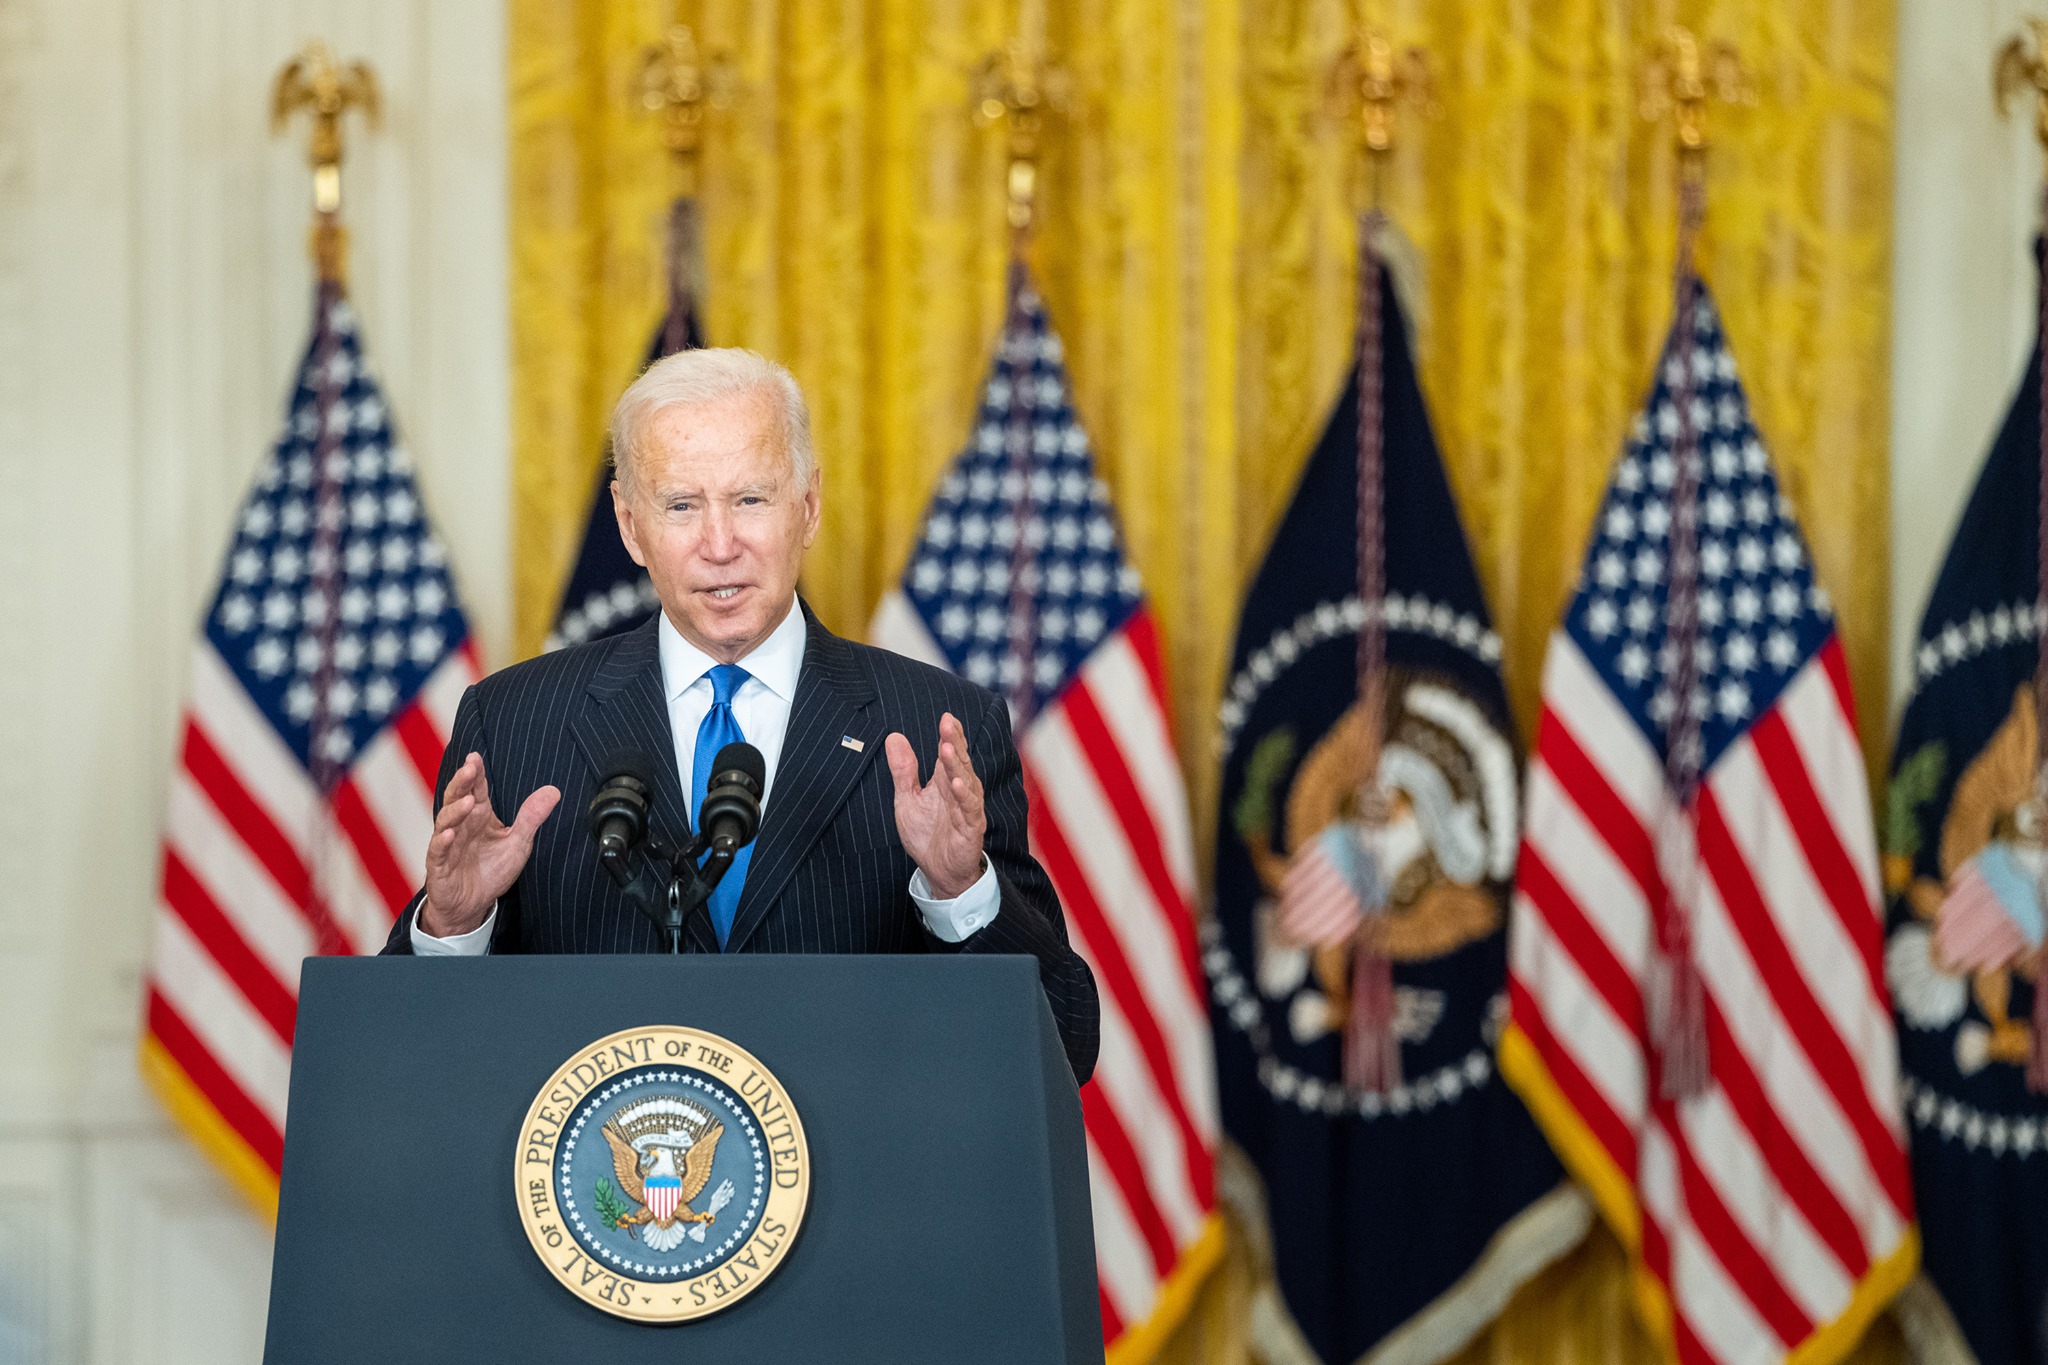 Biden promises Zelensky there will be no agreements about Ukraine behind its back